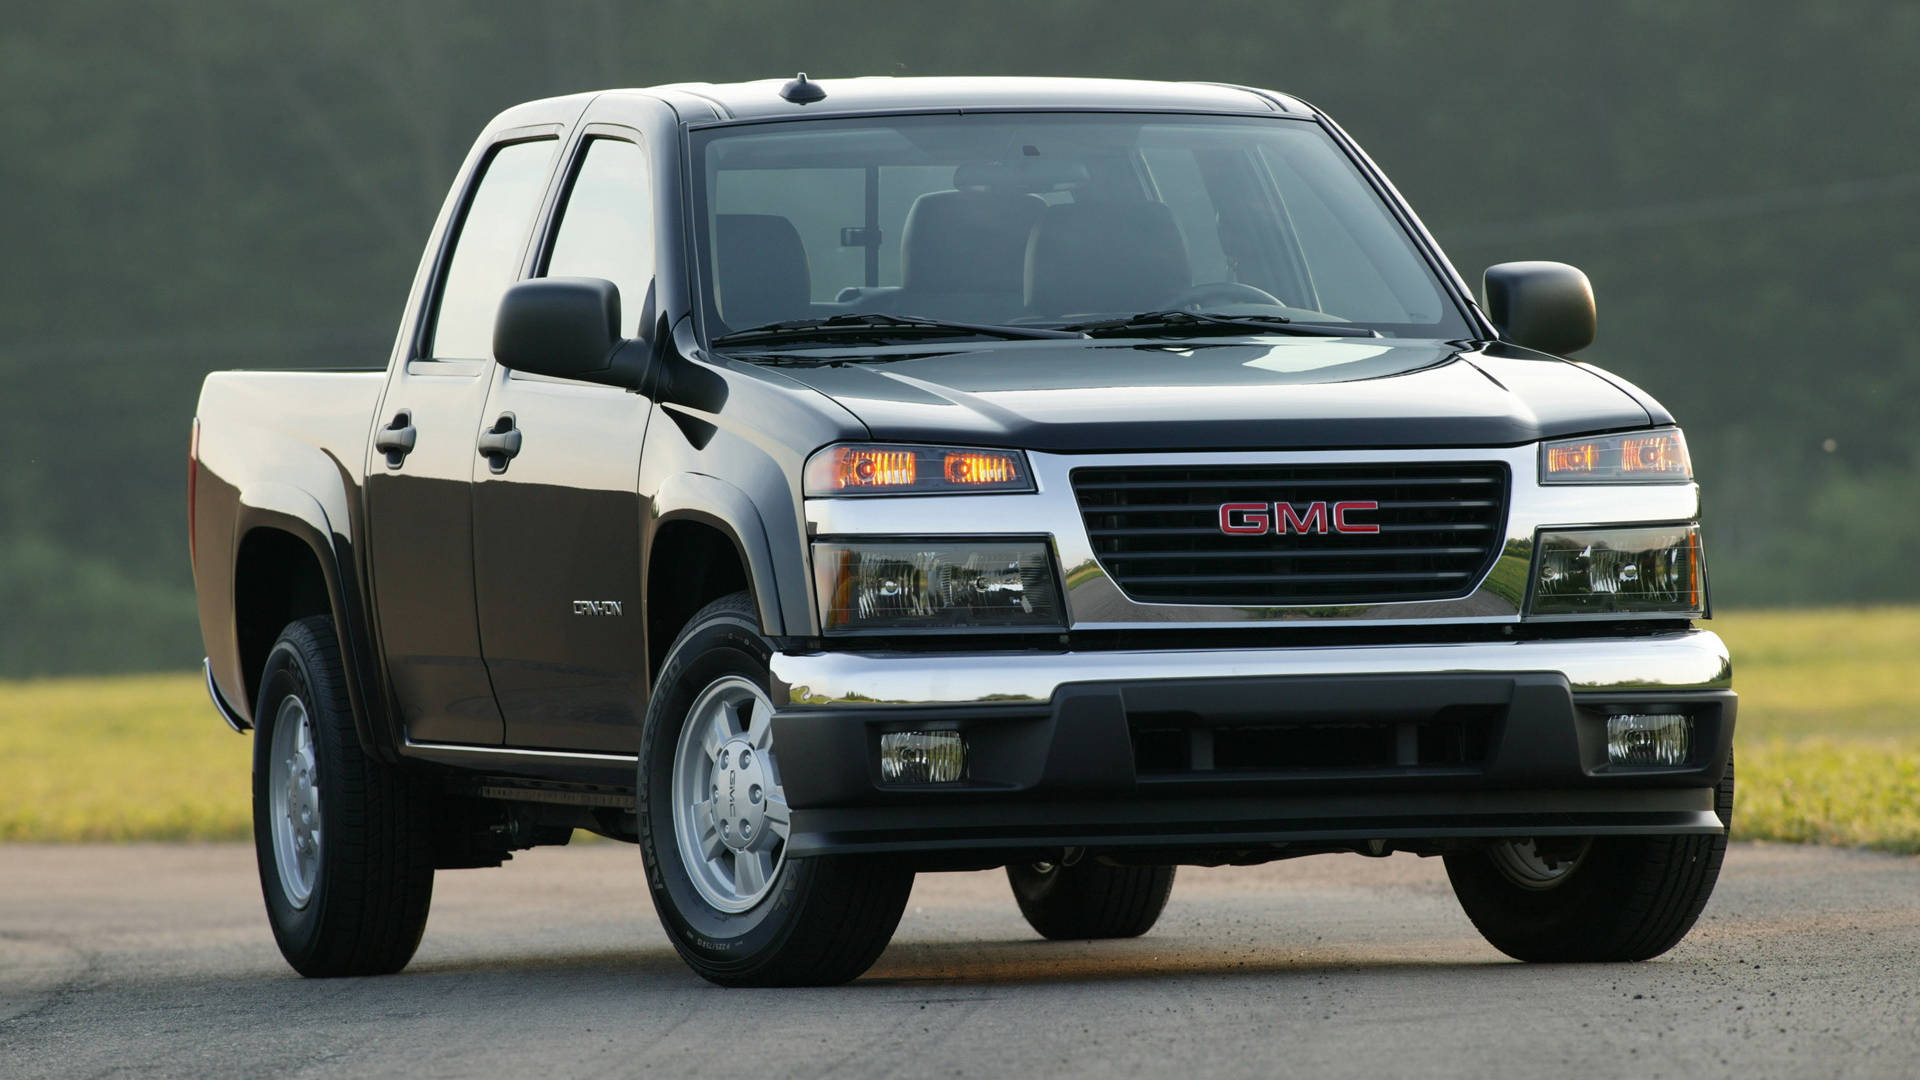 Gmc In A Wide Area Background